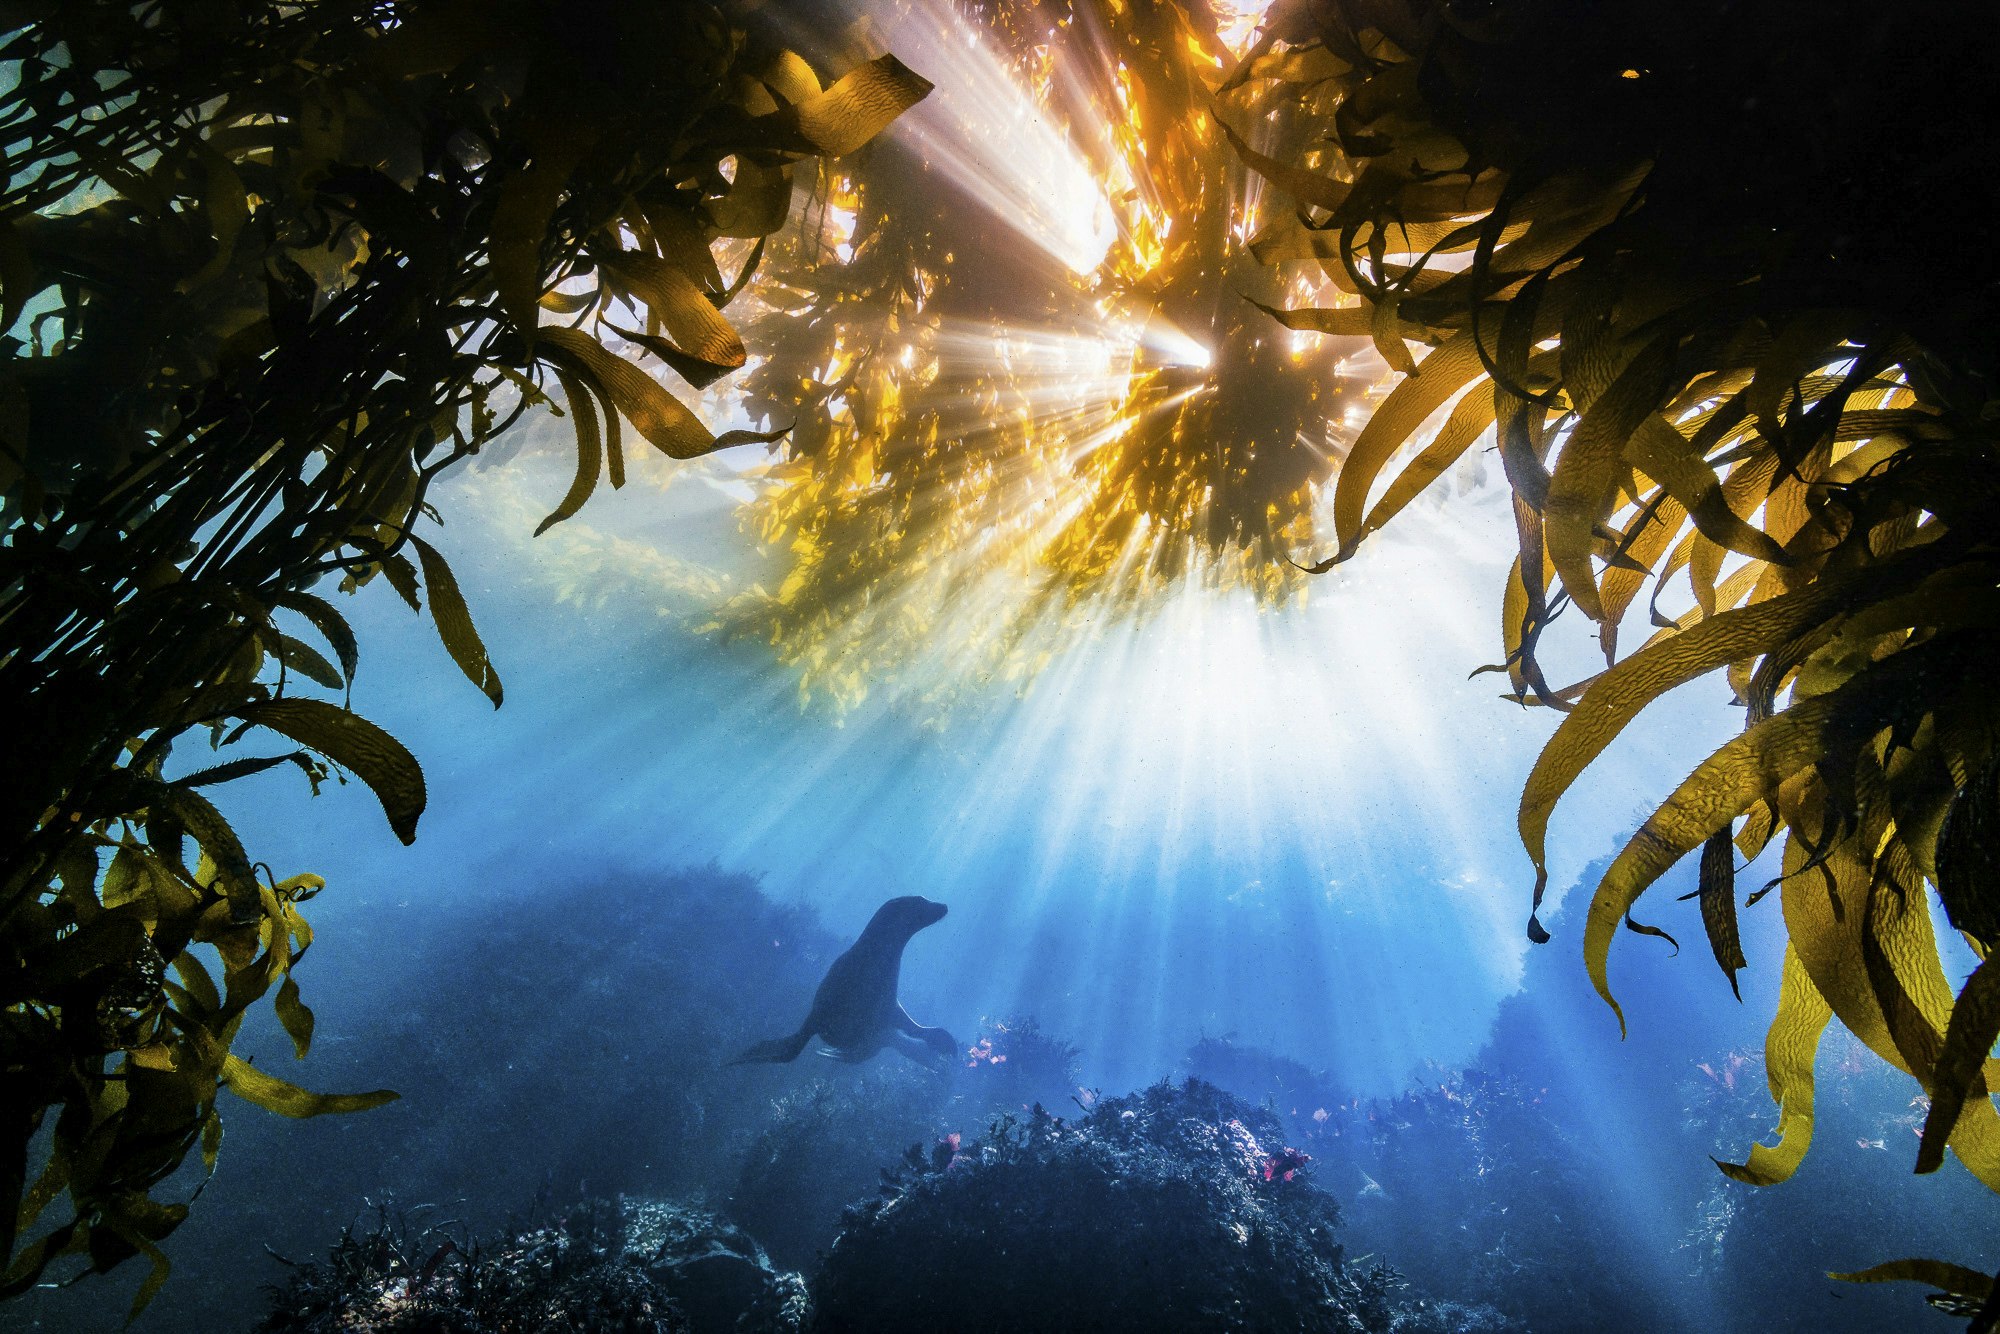 A shot of a sea lion underwater, its silhouette framed by the sunlight